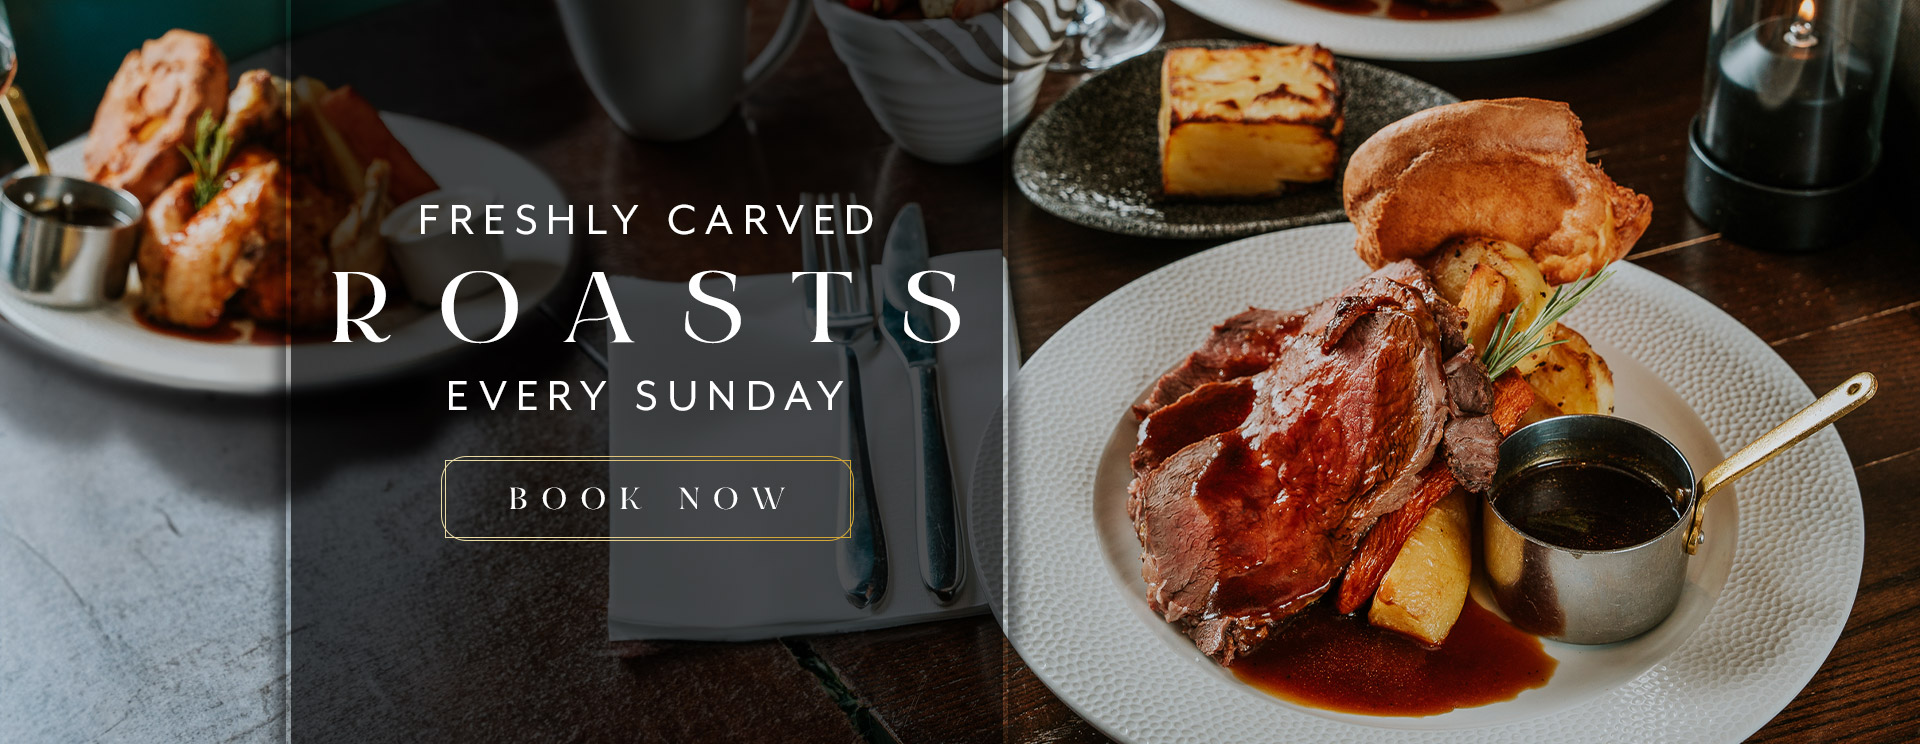 Sunday Lunch at The Kings Arms